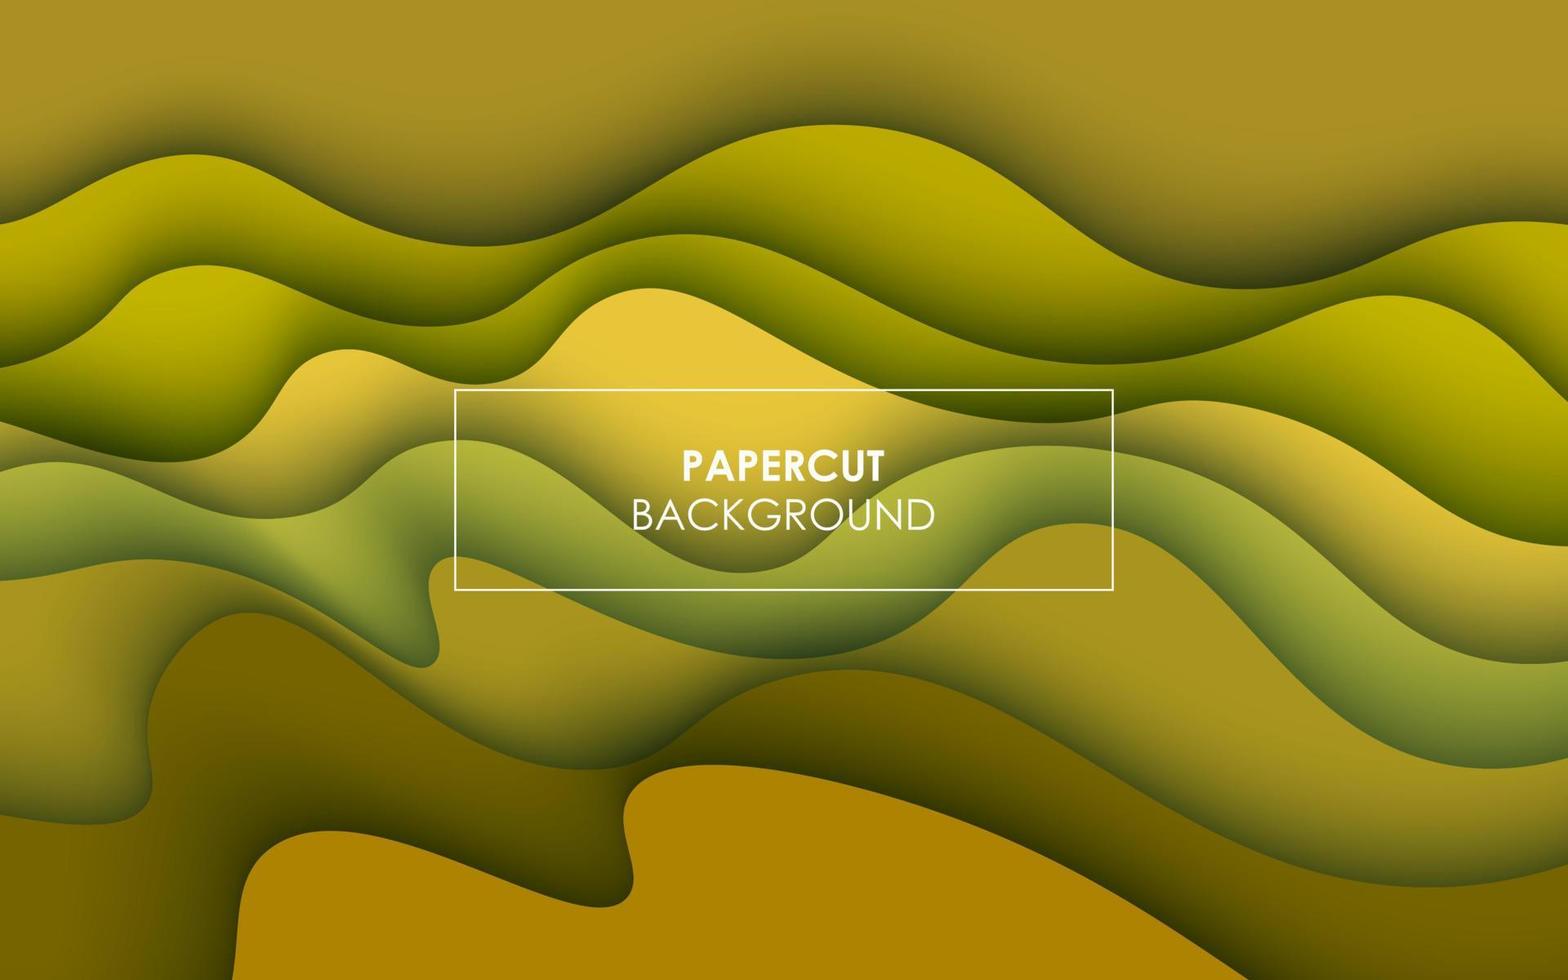 Multi layers yellow green texture 3D papercut layers in gradient vector banner. Abstract paper cut art background design for website template. Topography map concept or smooth origami paper cut